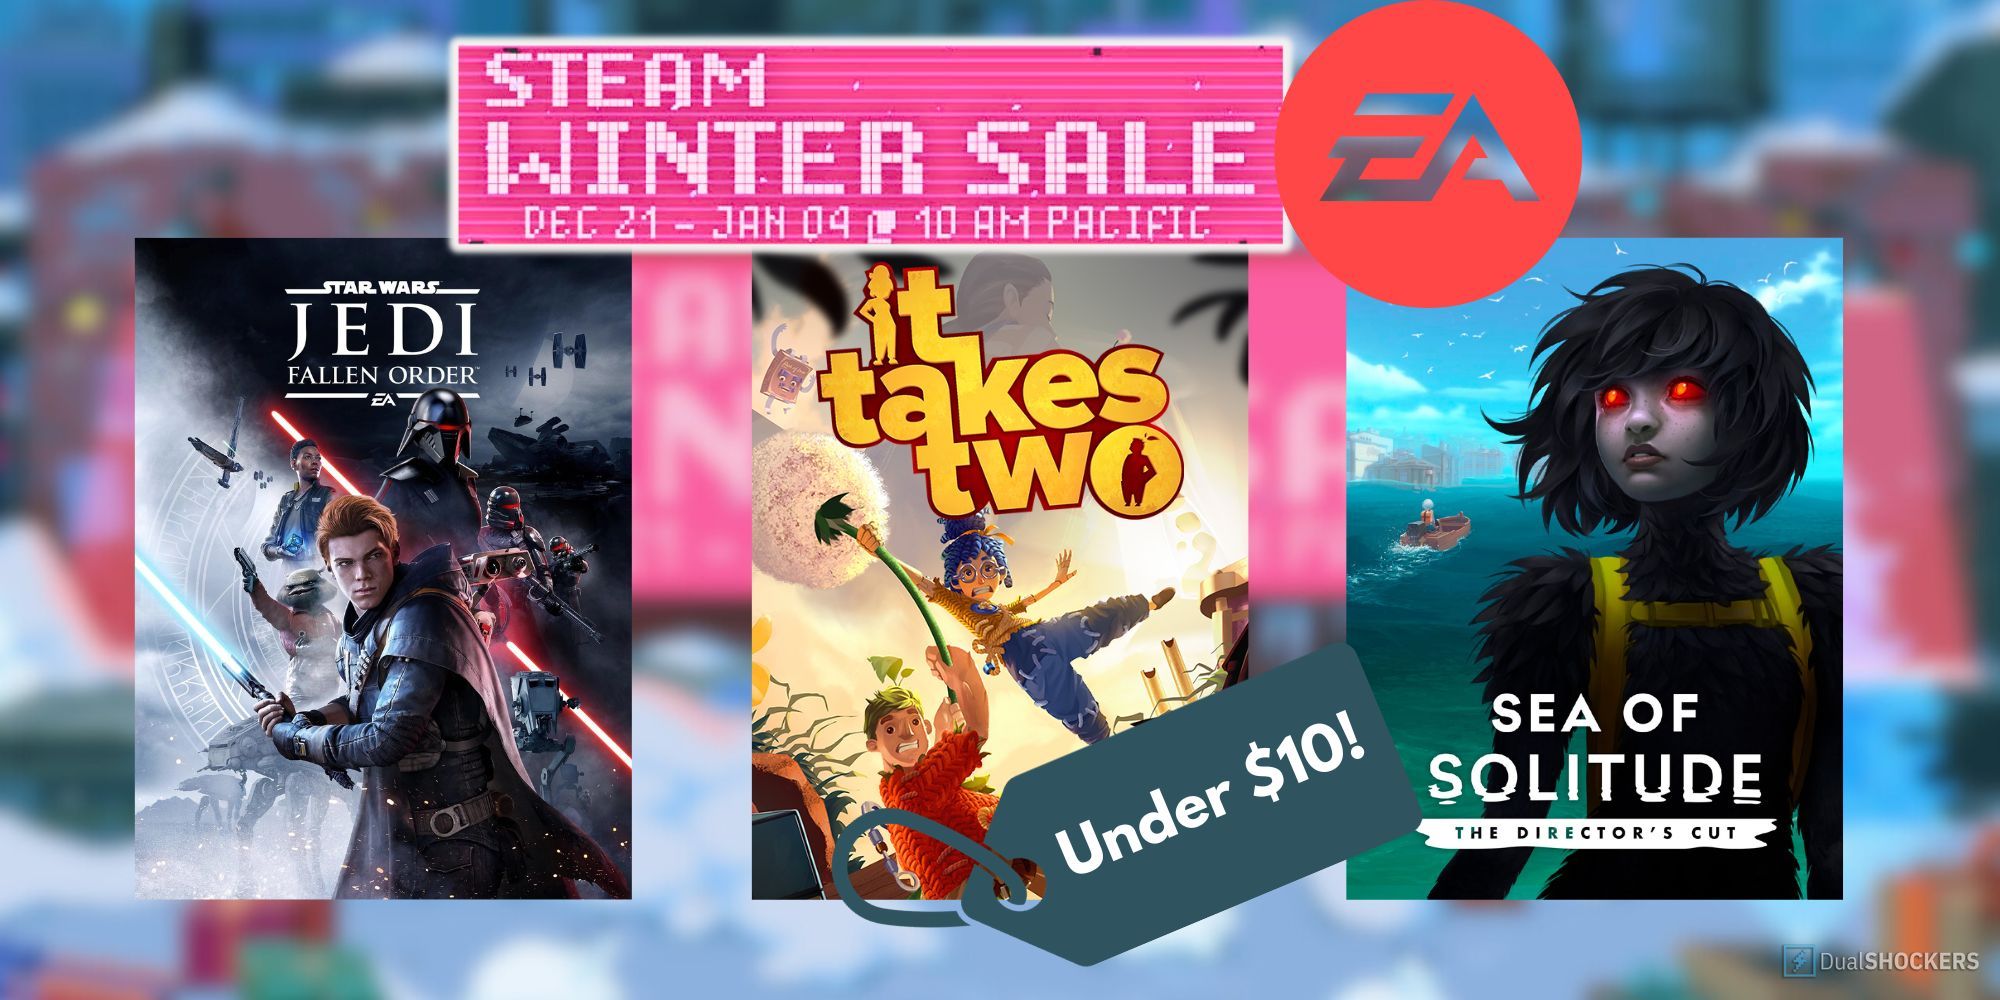 Product banner featuring the covers for Star Wars Jedi: Fallen Order, It Takes Two, and Sea of Solitude with the Steam Winter Sale logo and a Under $10 off tag